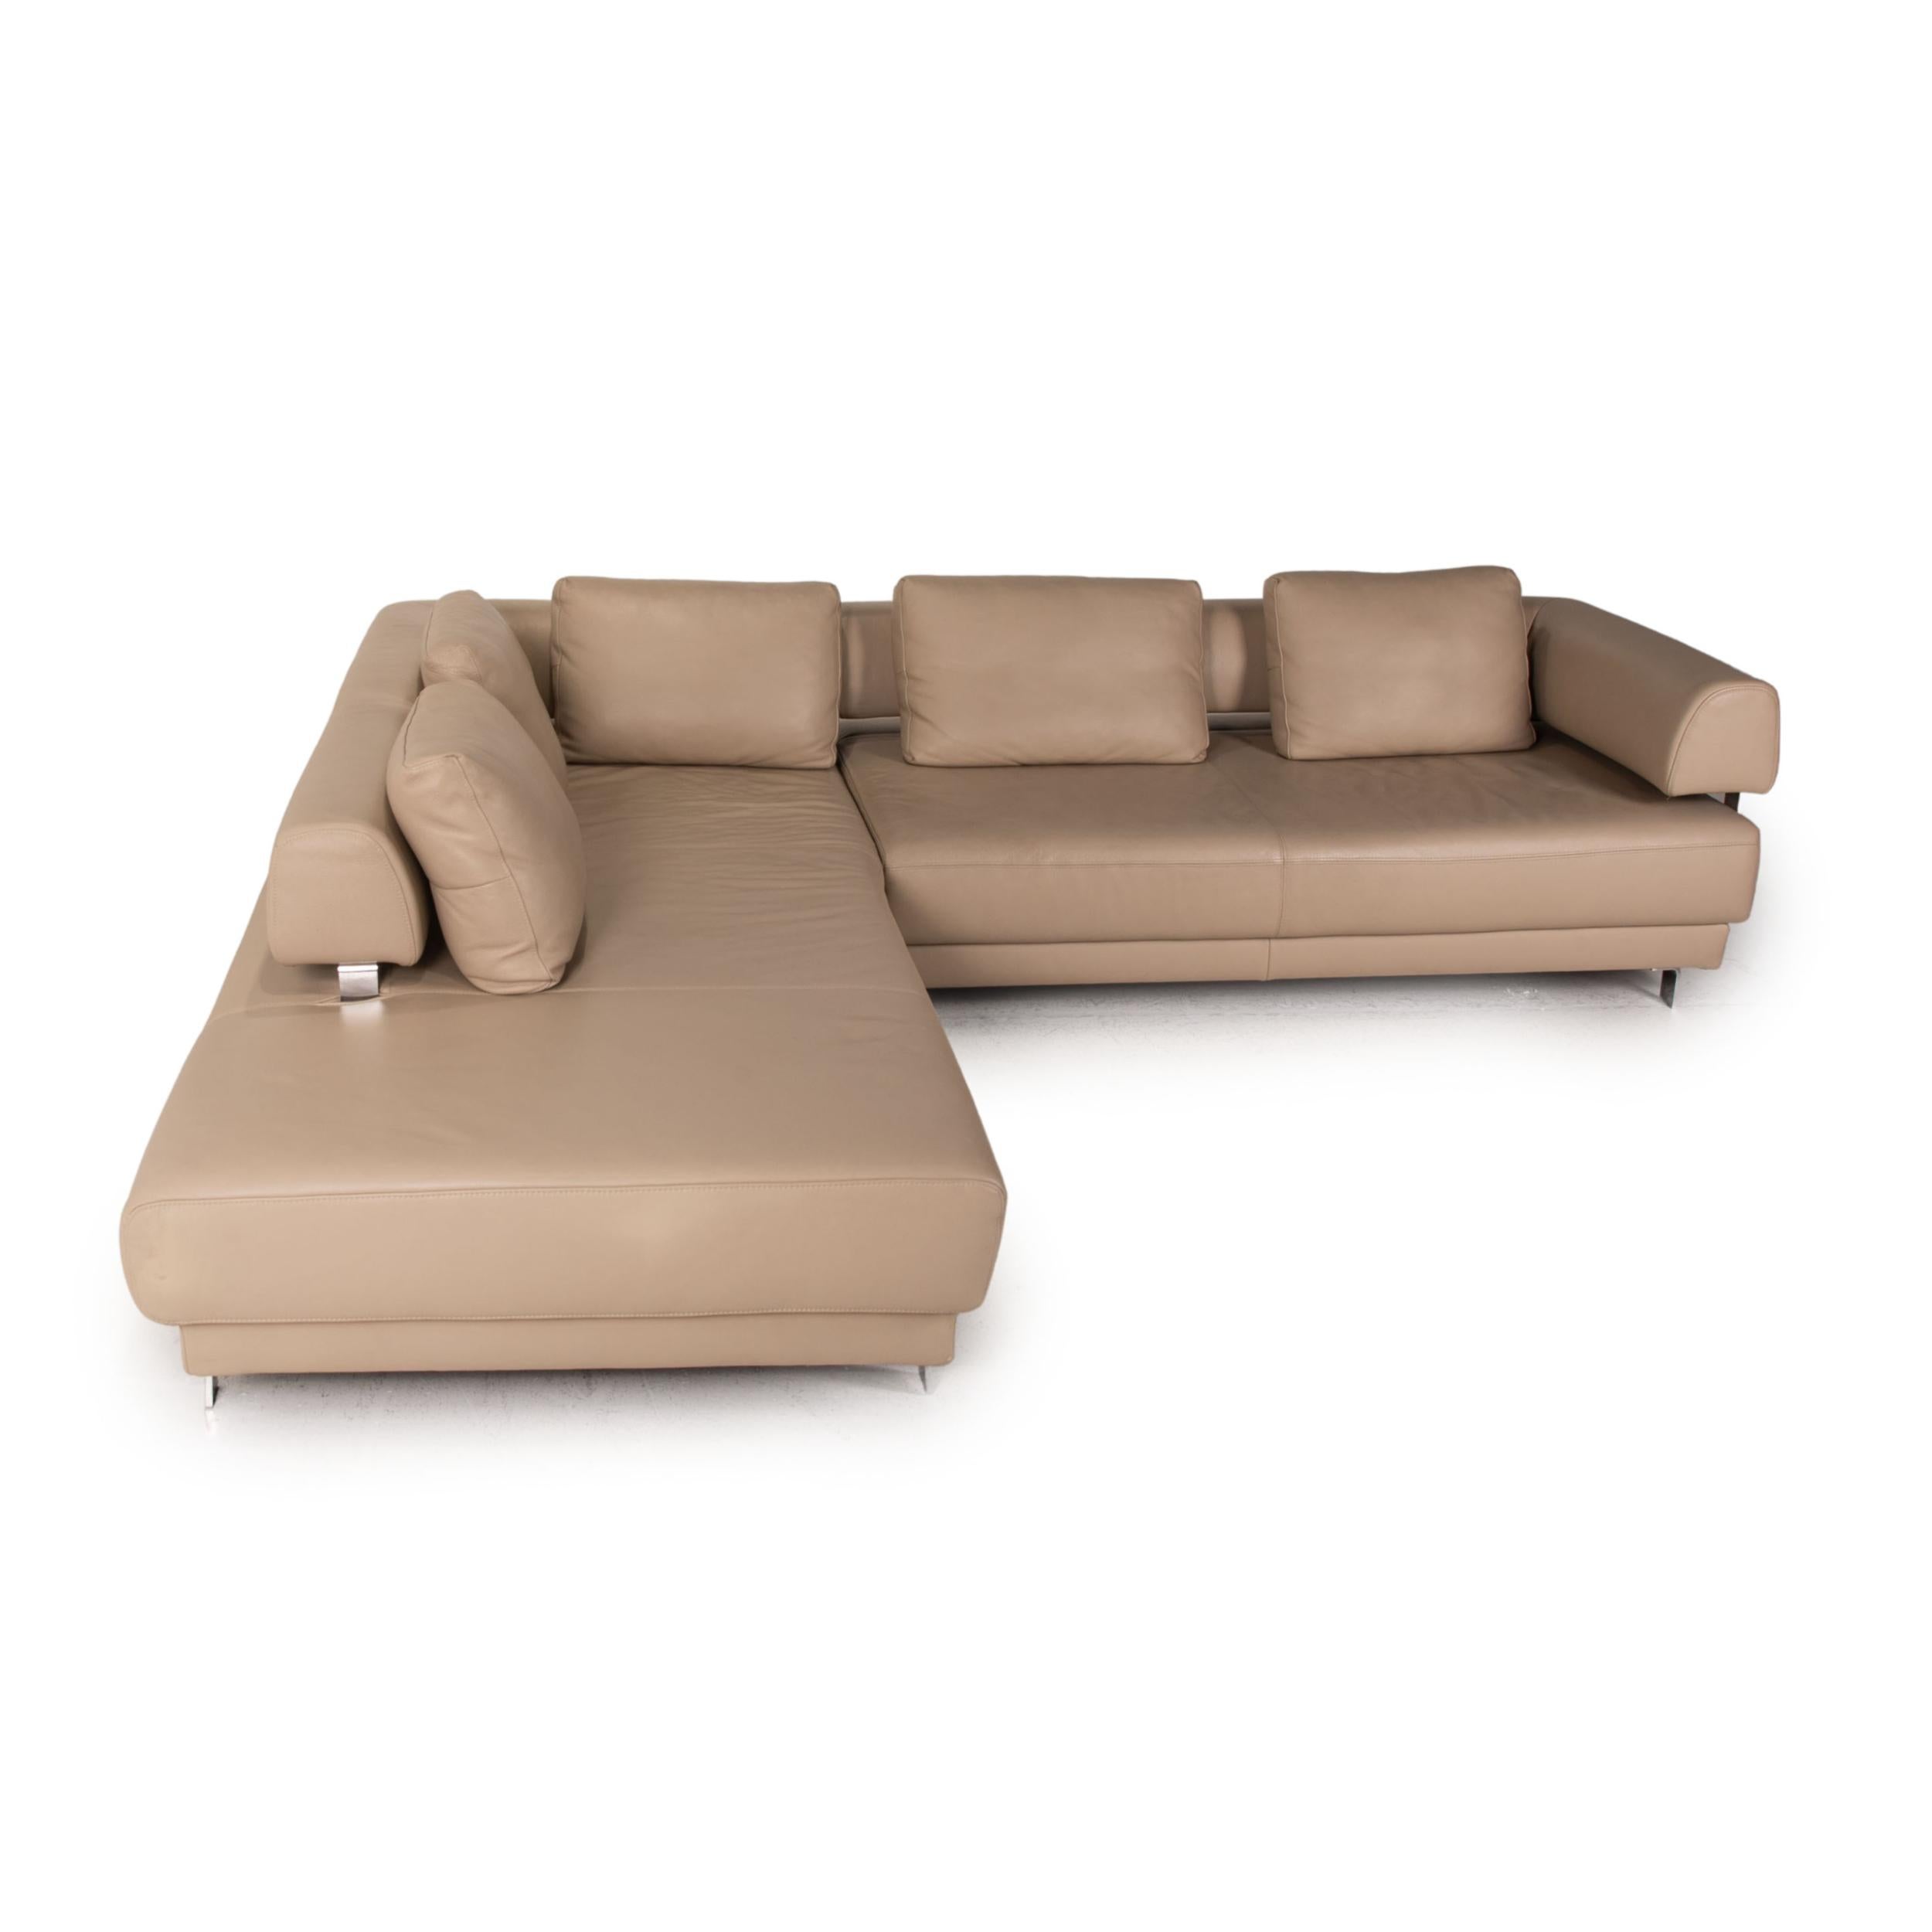 Ewald Schillig Brand Face Leather Sofa Beige Corner Sofa Couch For Sale 2